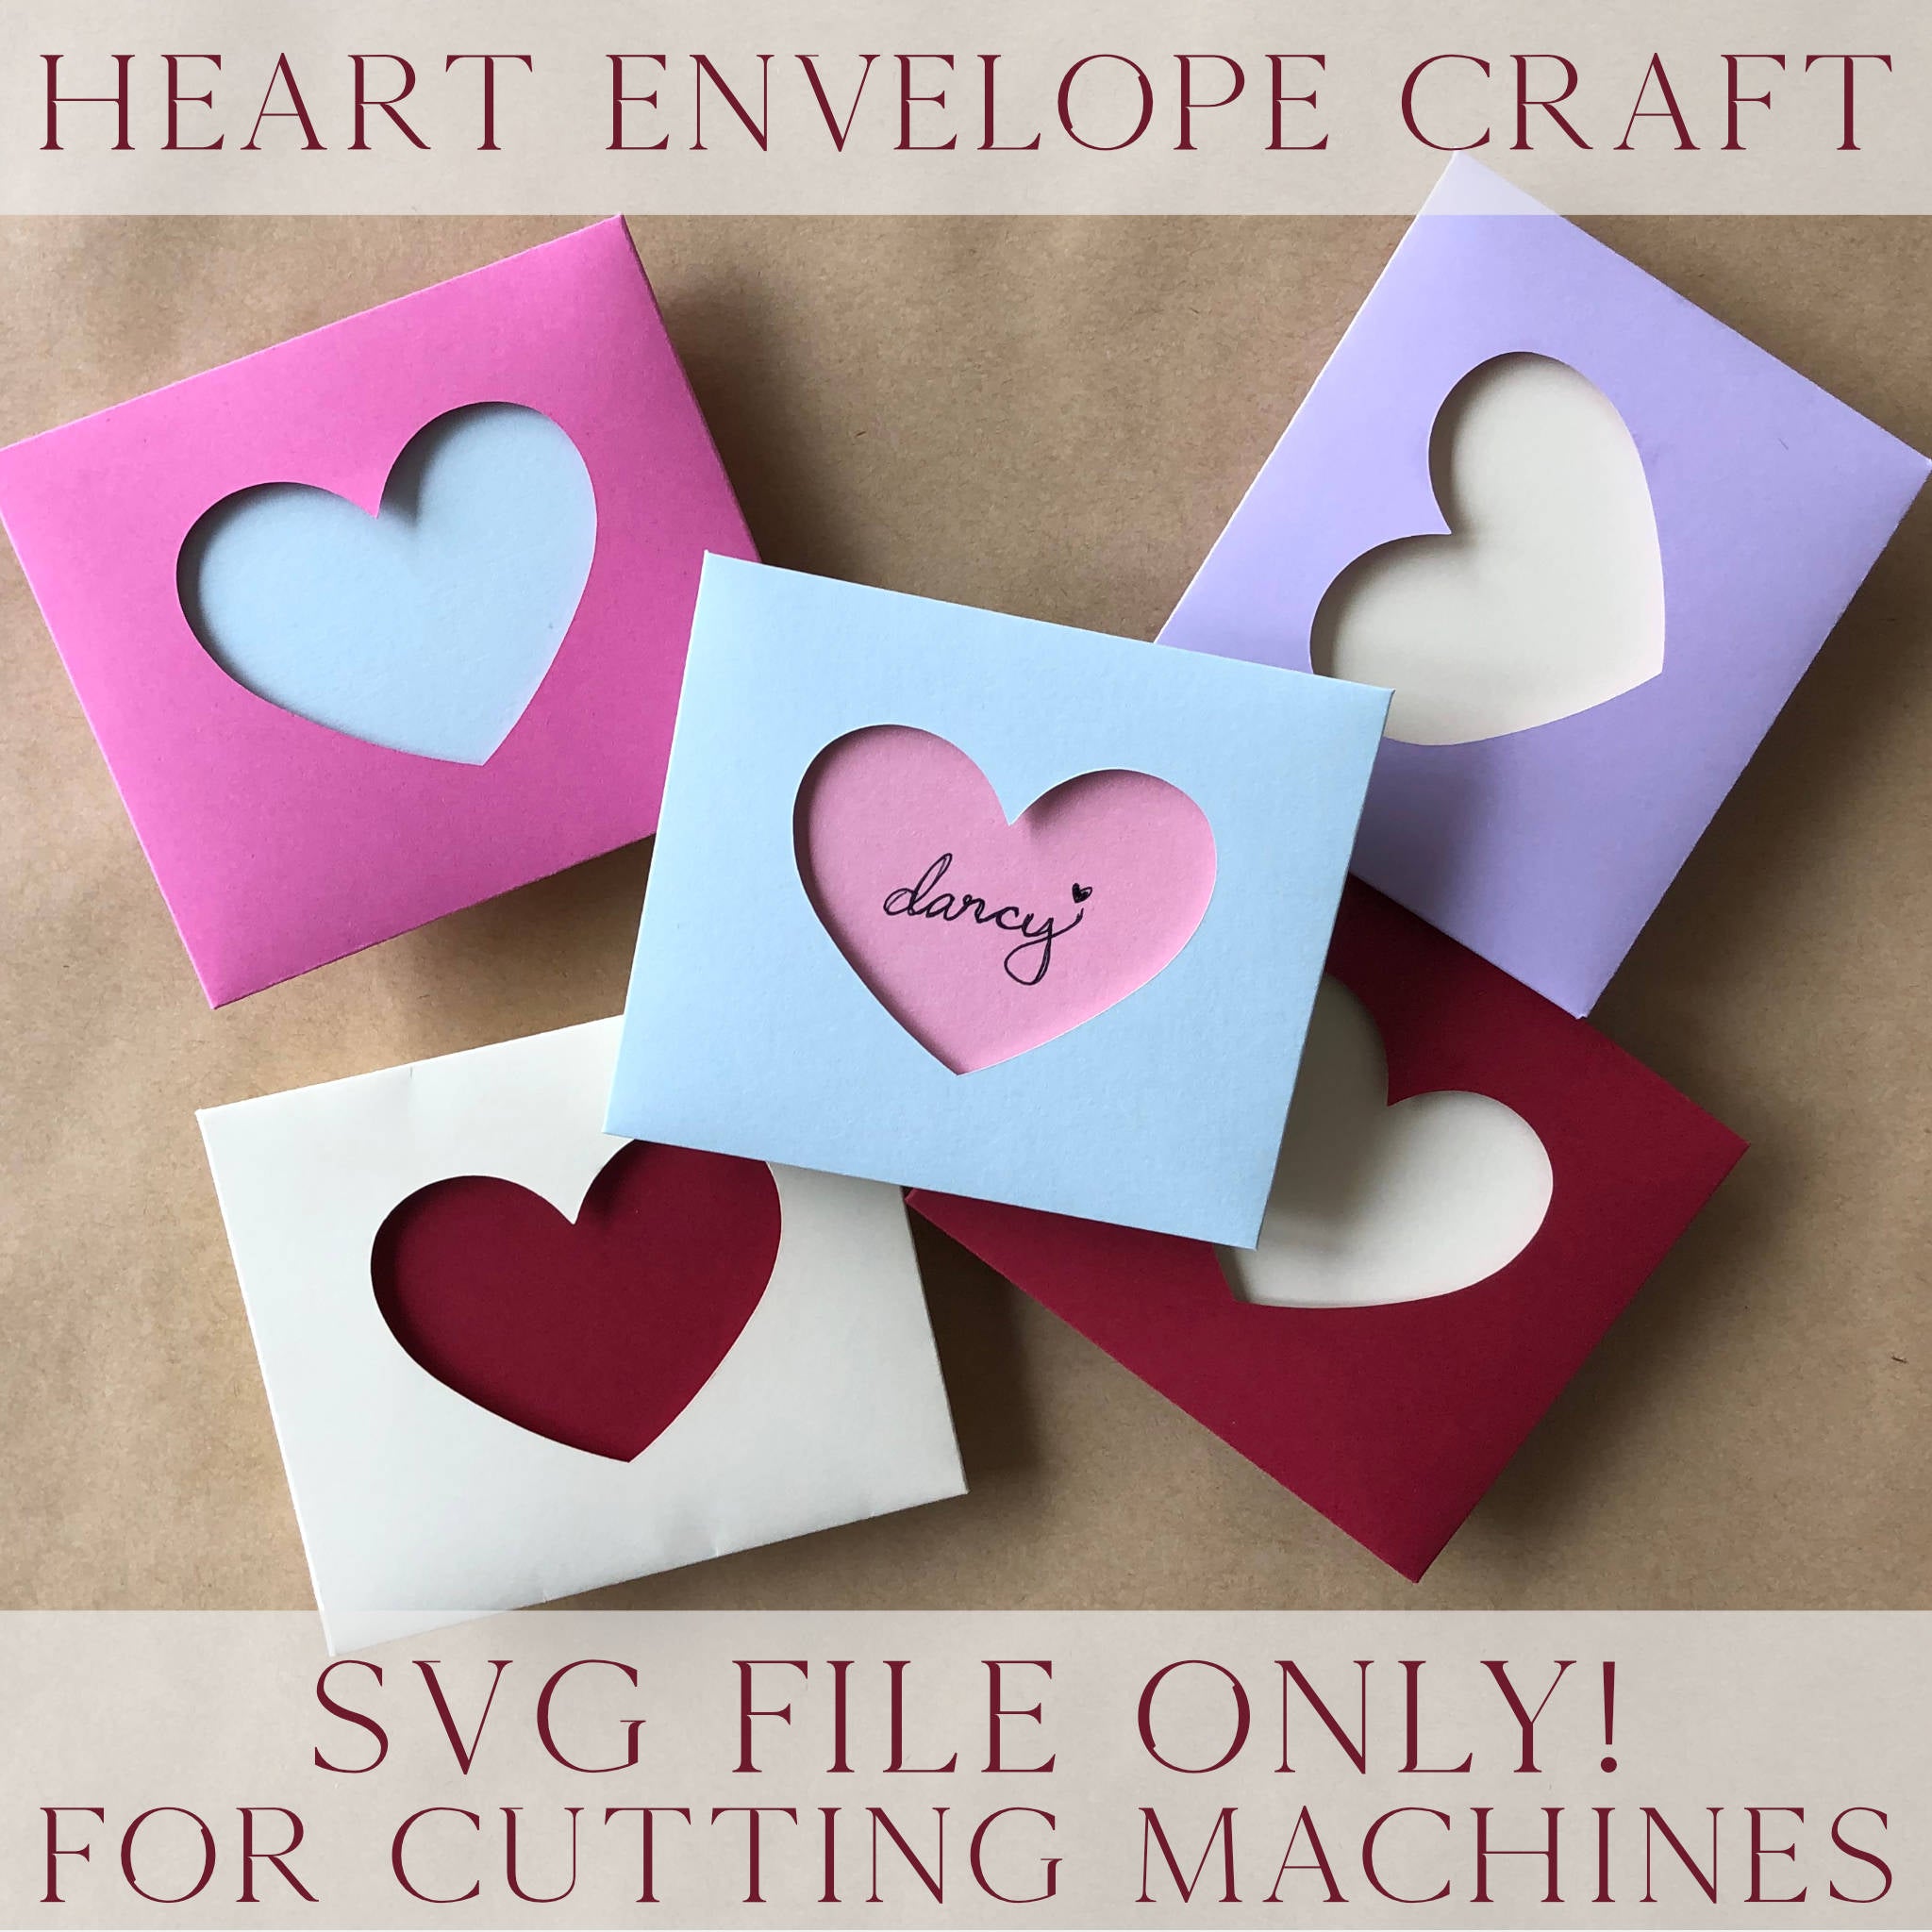 Download Envelope For Love Notes Valentine S Day Envelope Laser Cut Envelope With Heart Svg Cutting Files Scroll Wedding Envelope Digital Template Materials Craft Supplies Tools